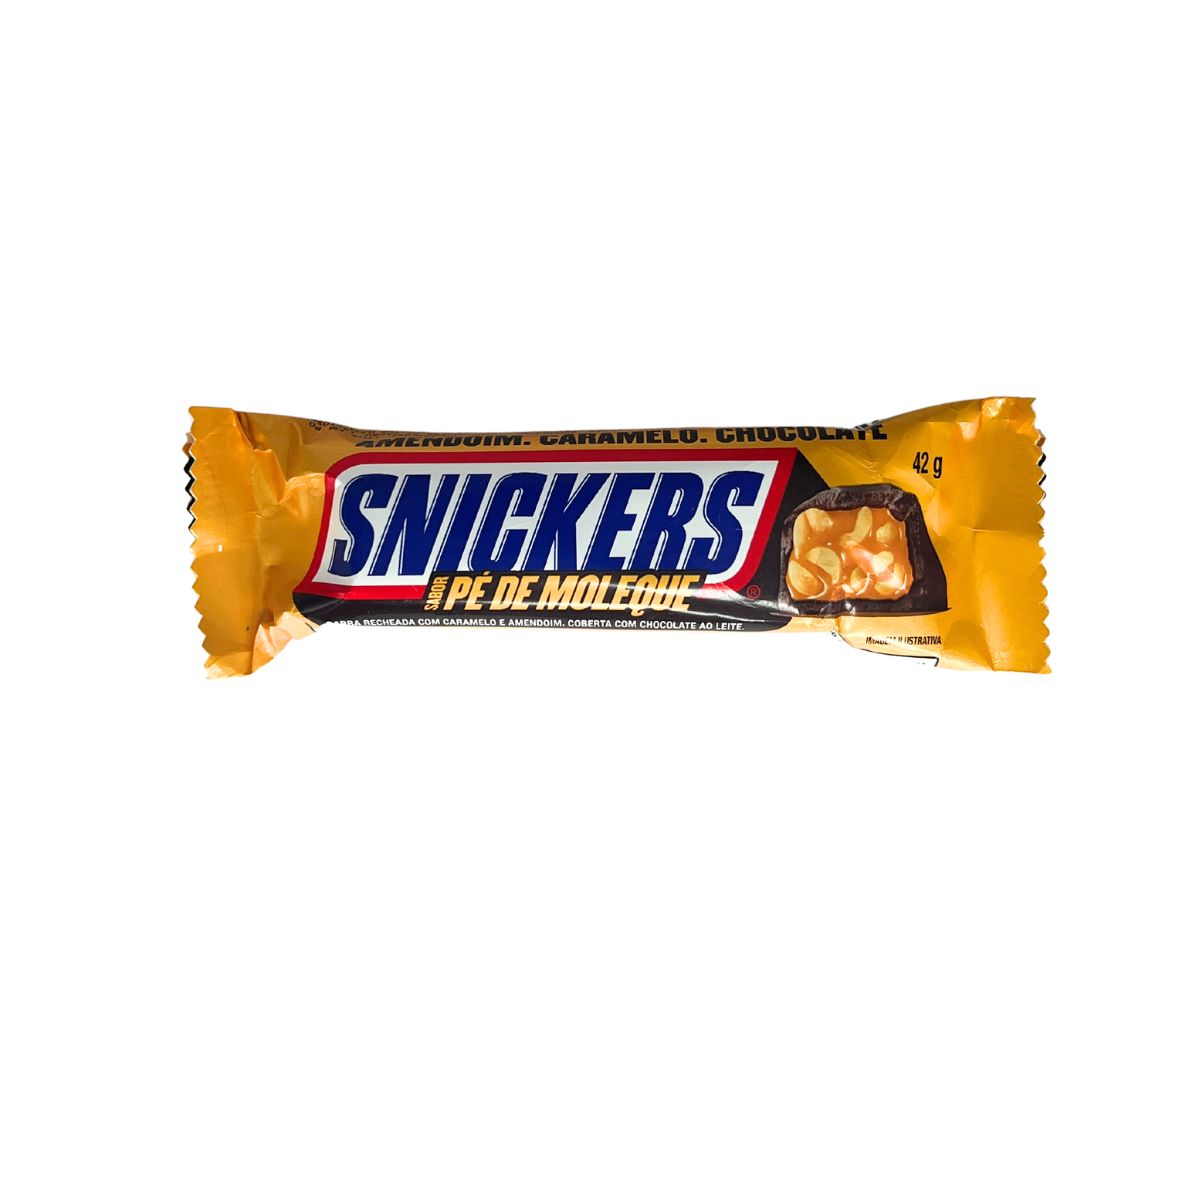 Limited Edition Snickers Peanut Brittle